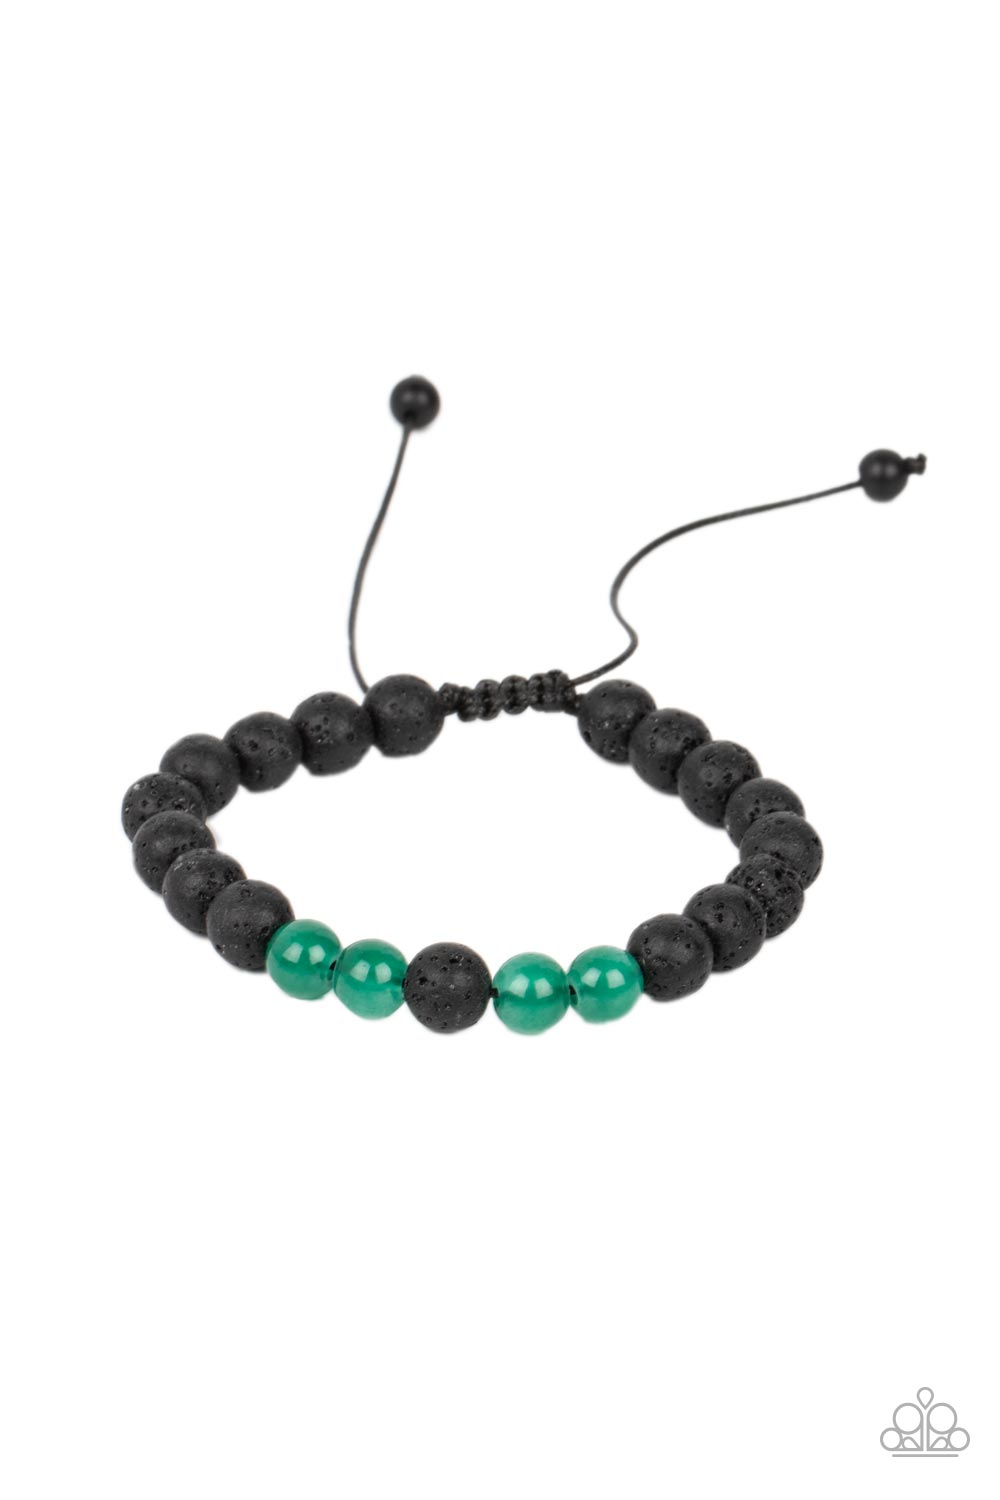 Alternative Rock Green Pull-Tie Bracelet - Paparazzi Accessories  An earthy collection of black lava rock and jade stone beads are threaded along a black cord around the wrist, resulting in a seasonal pop of color. Features an adjustable sliding knot closure.  Sold as one individual bracelet.